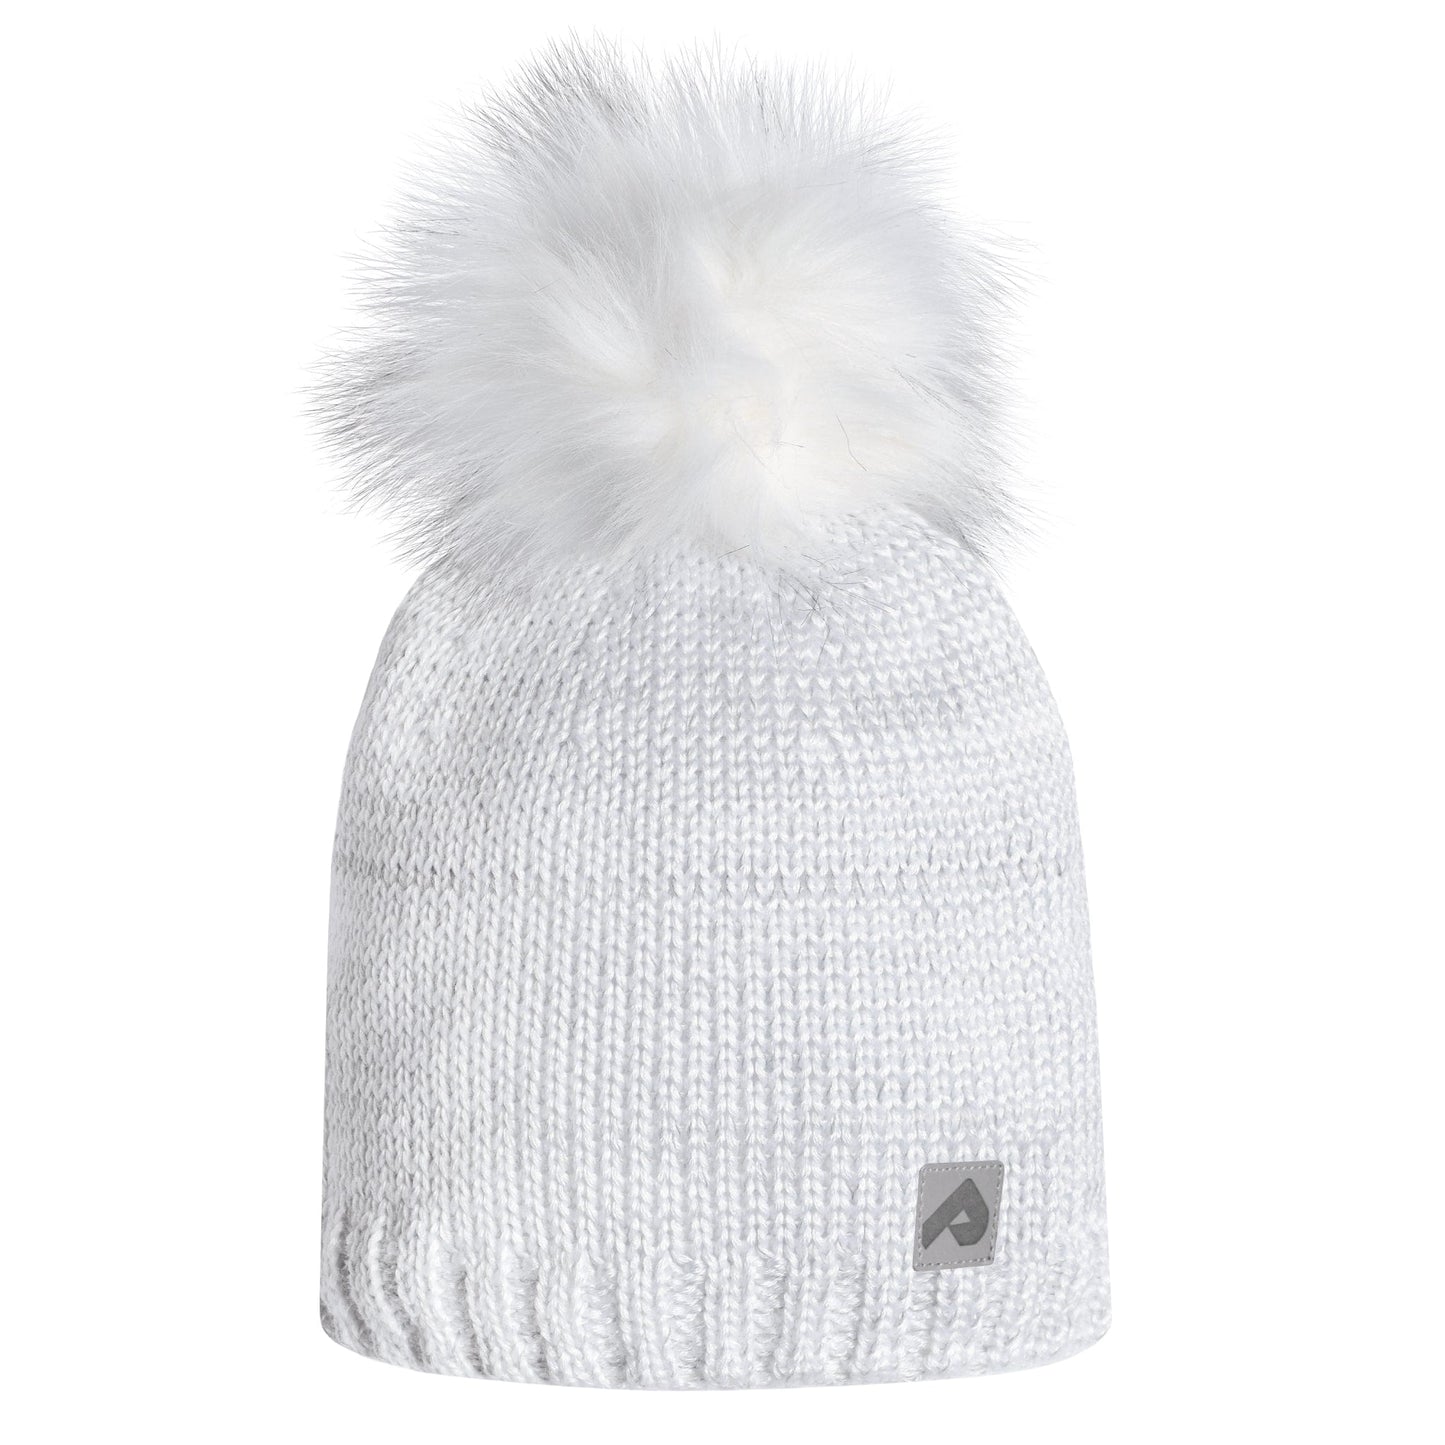 Winter hat with removable pompom - Multi White